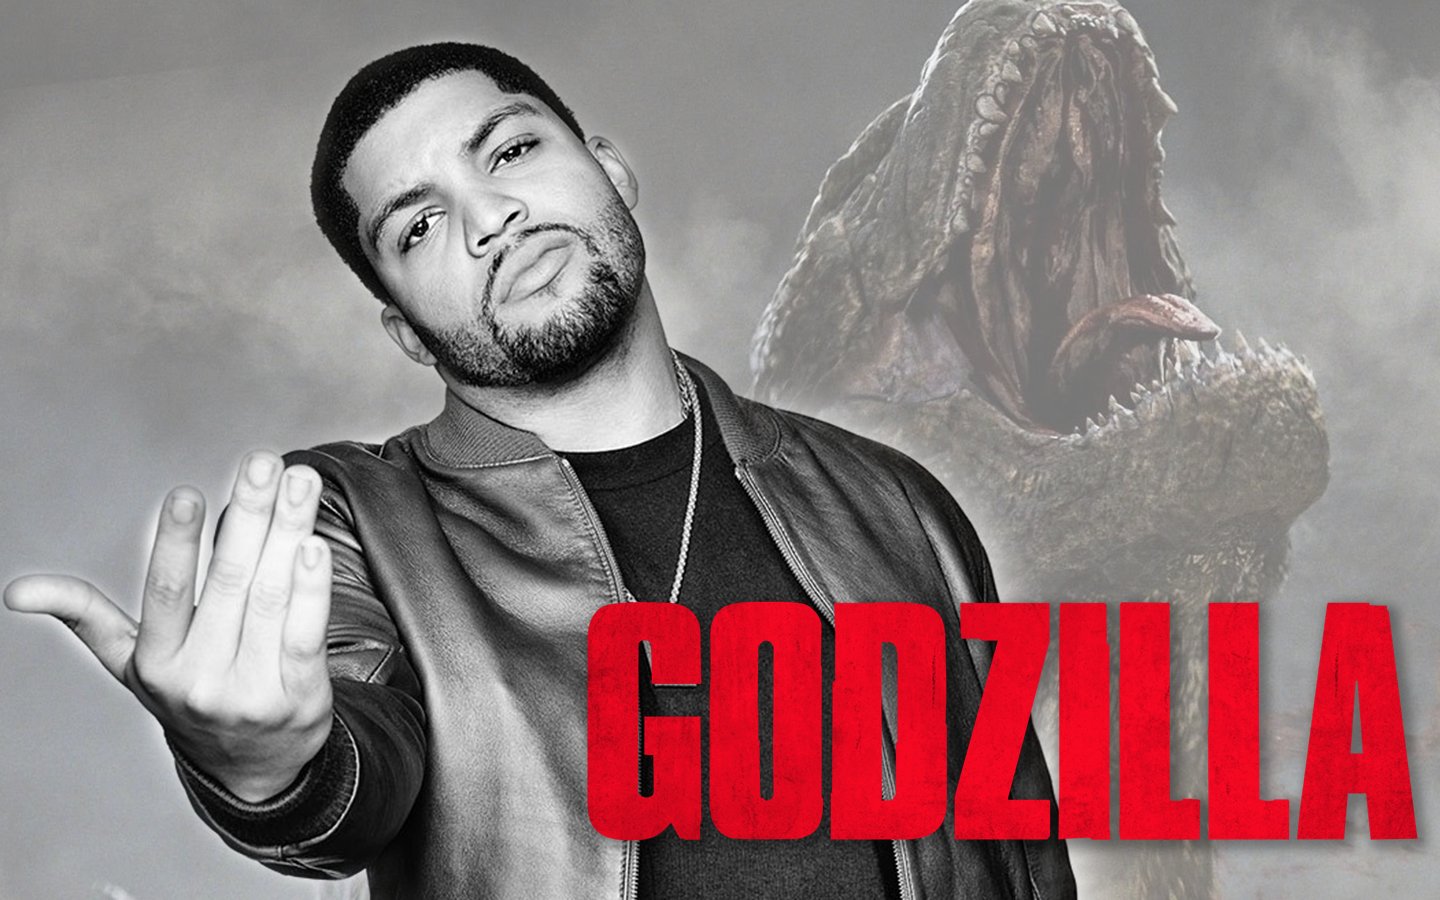 O’Shea Jackson Jr. in Negotiations to join Godzilla: King of the Monsters